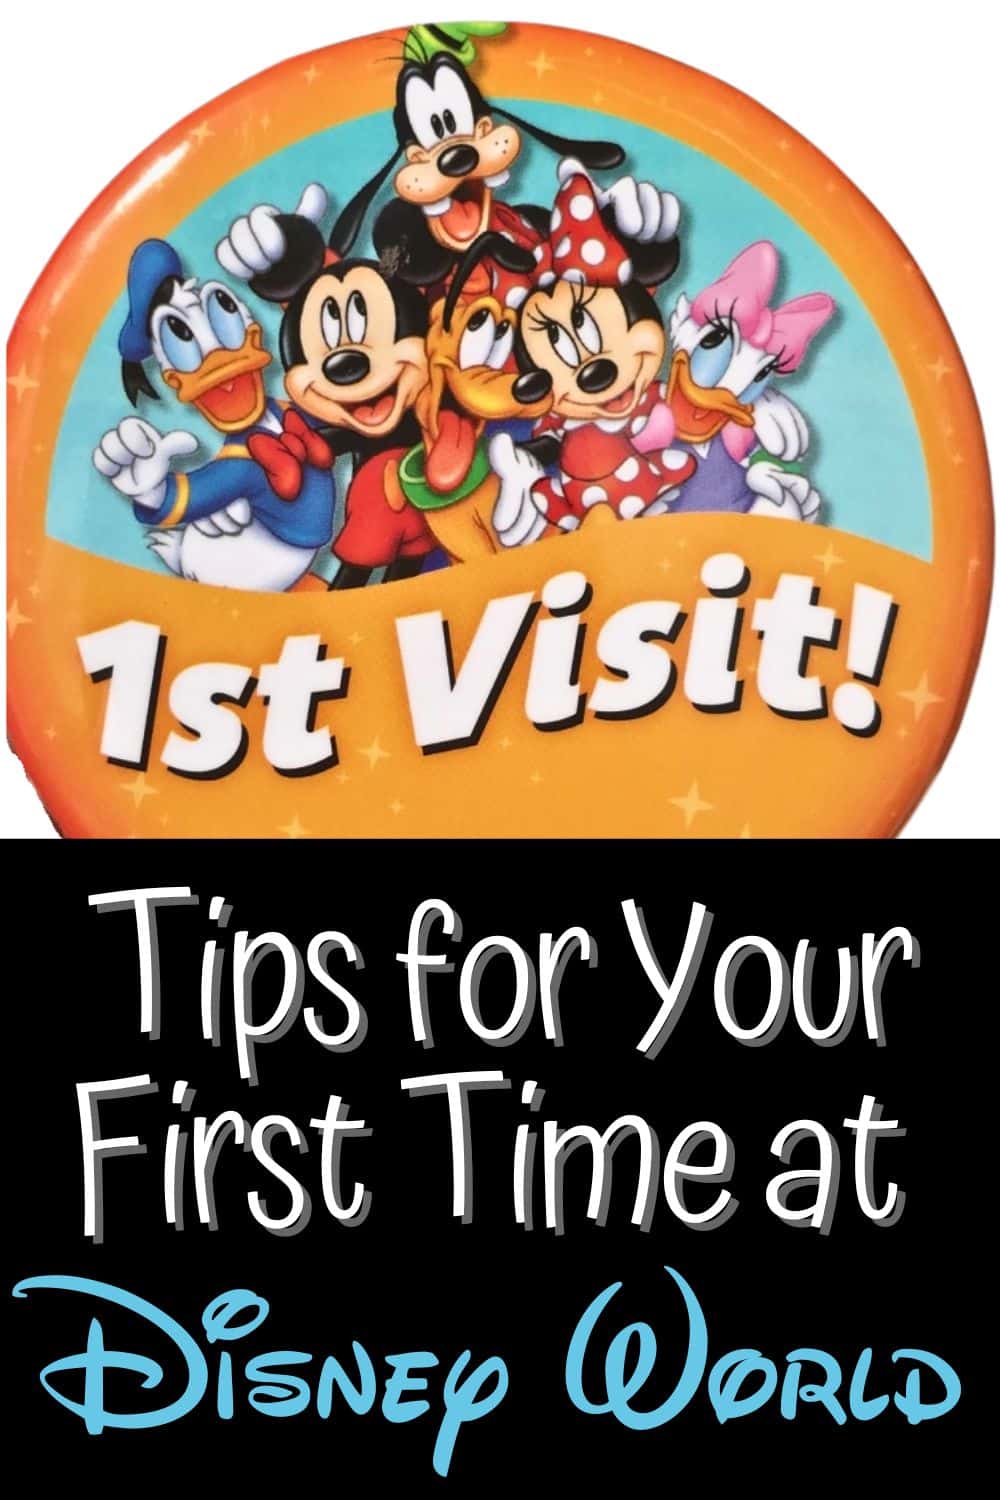 Tips for Your First Time at Disney World